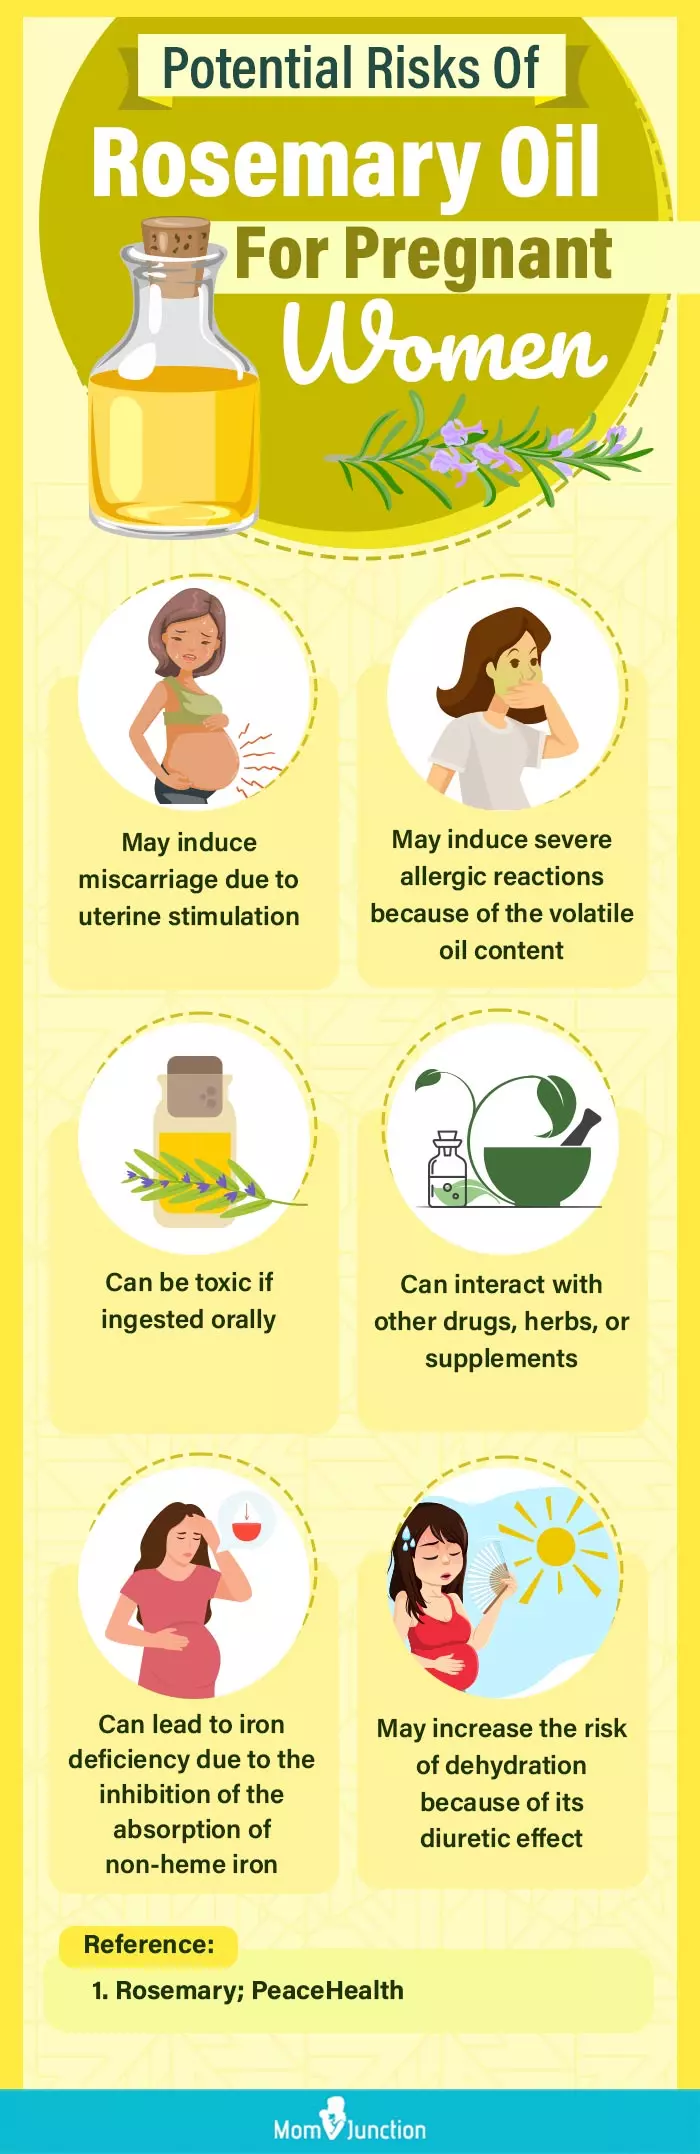 potential risks of rosemary oil for pregnant women (infographic)